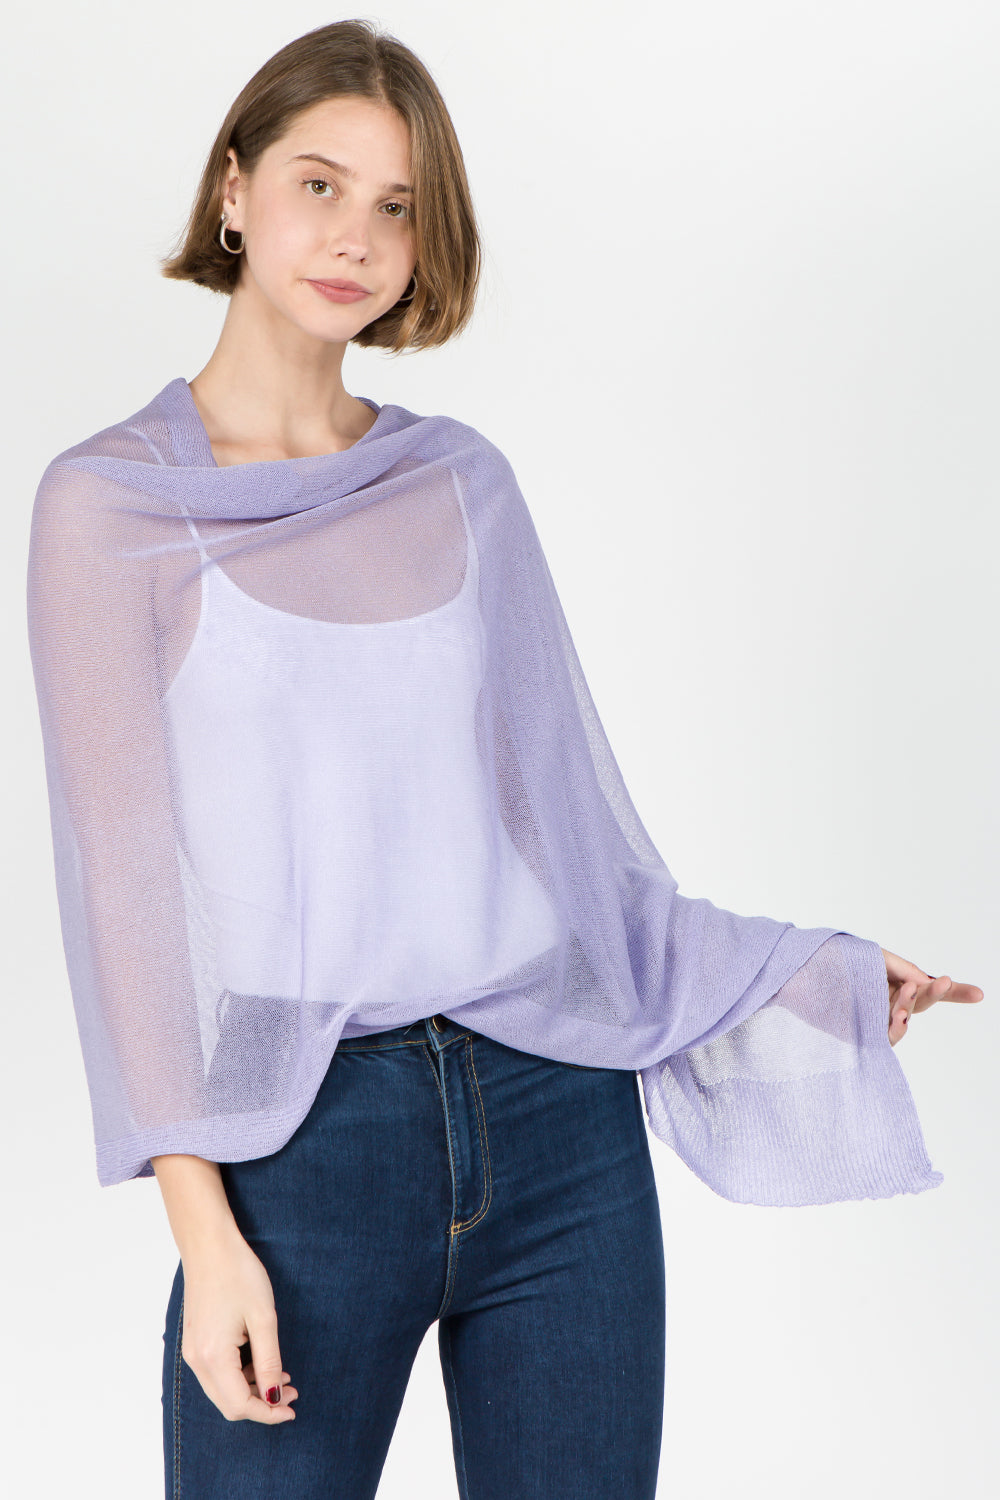 SV-8631 sheer shawl with buttons